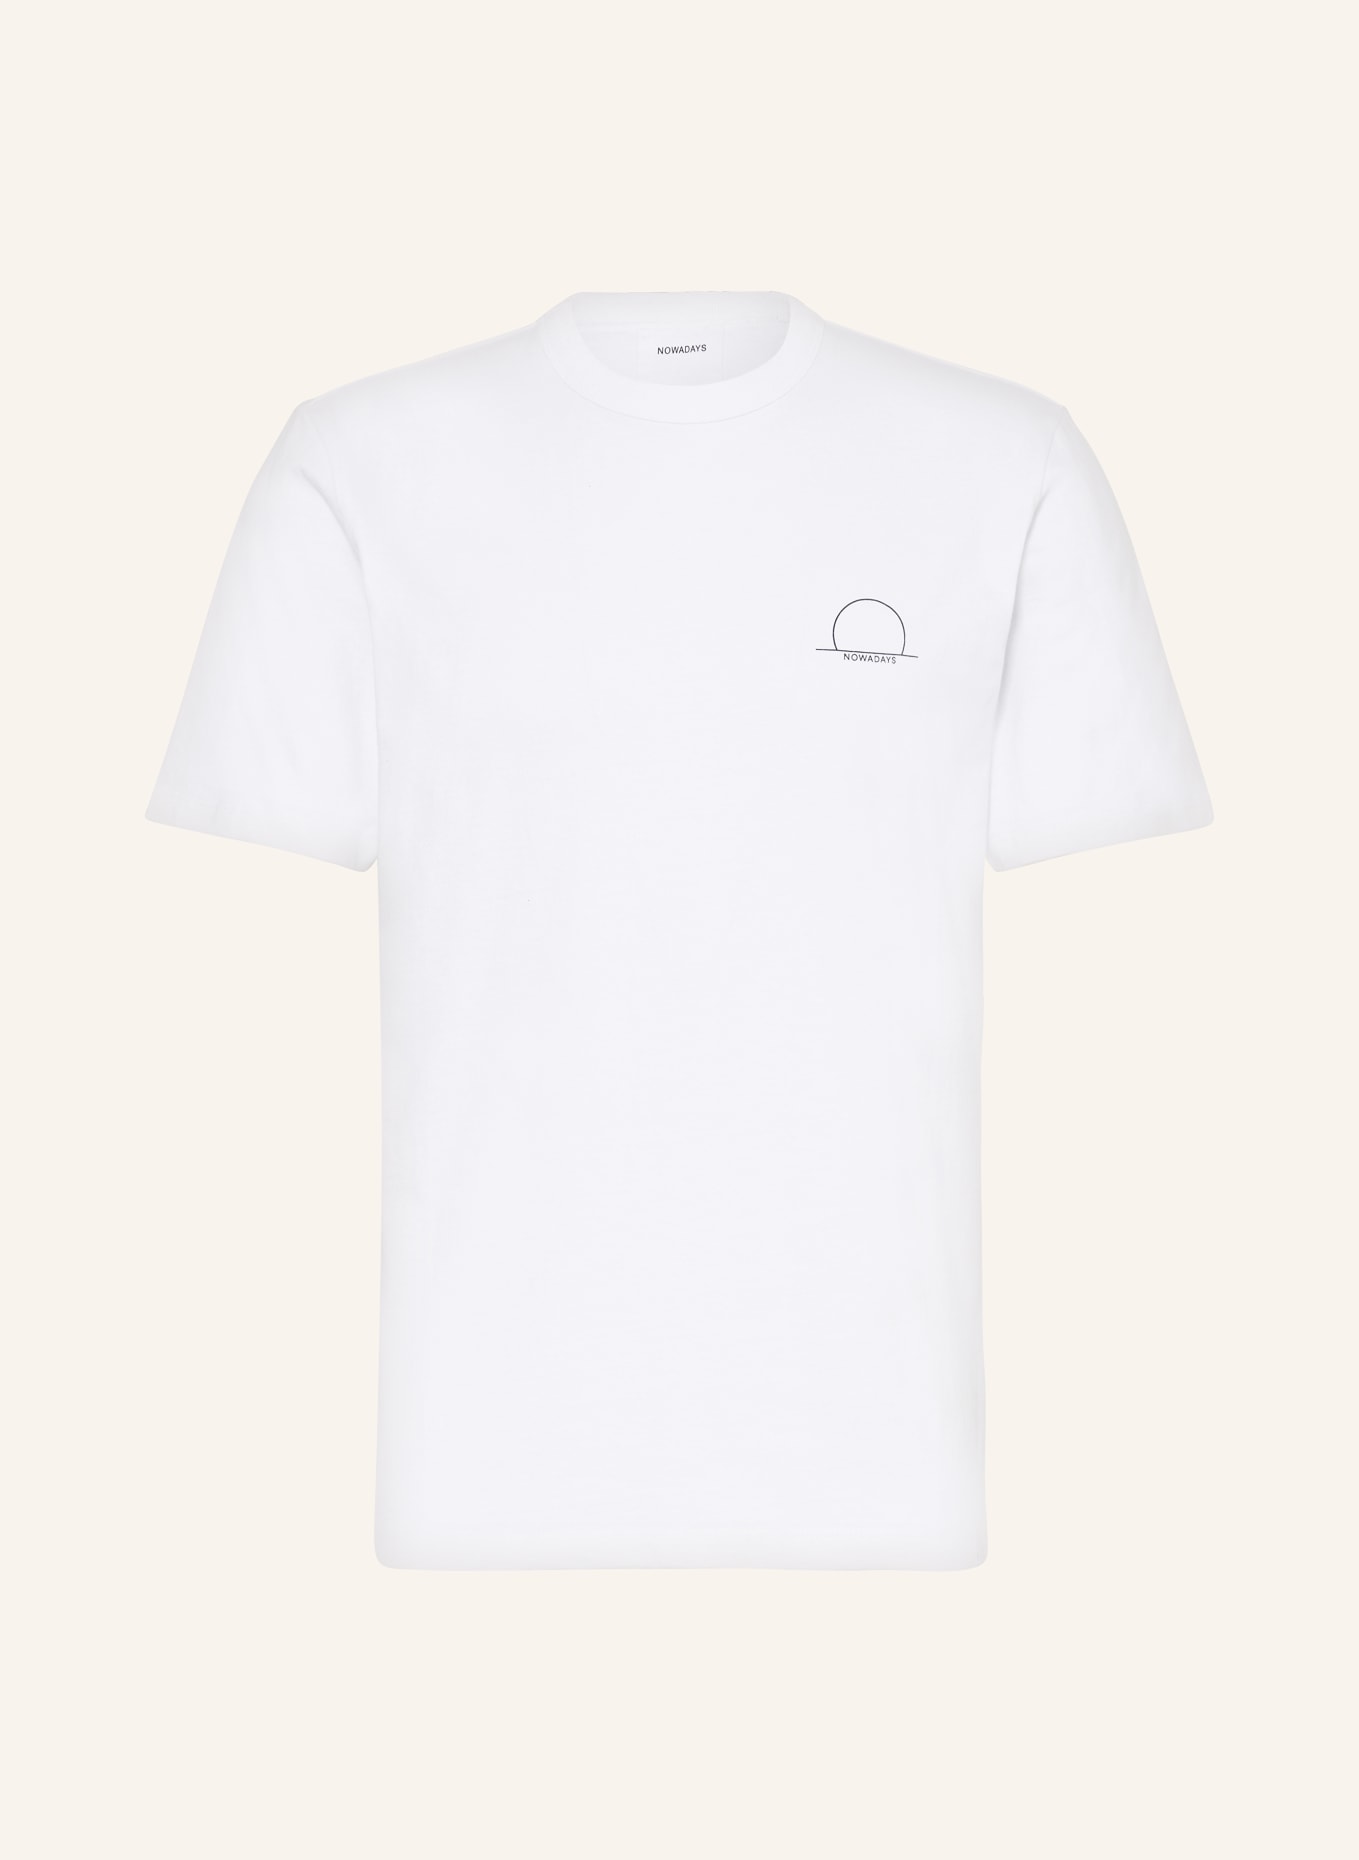 NOWADAYS T-shirt, Color: WHITE (Image 1)